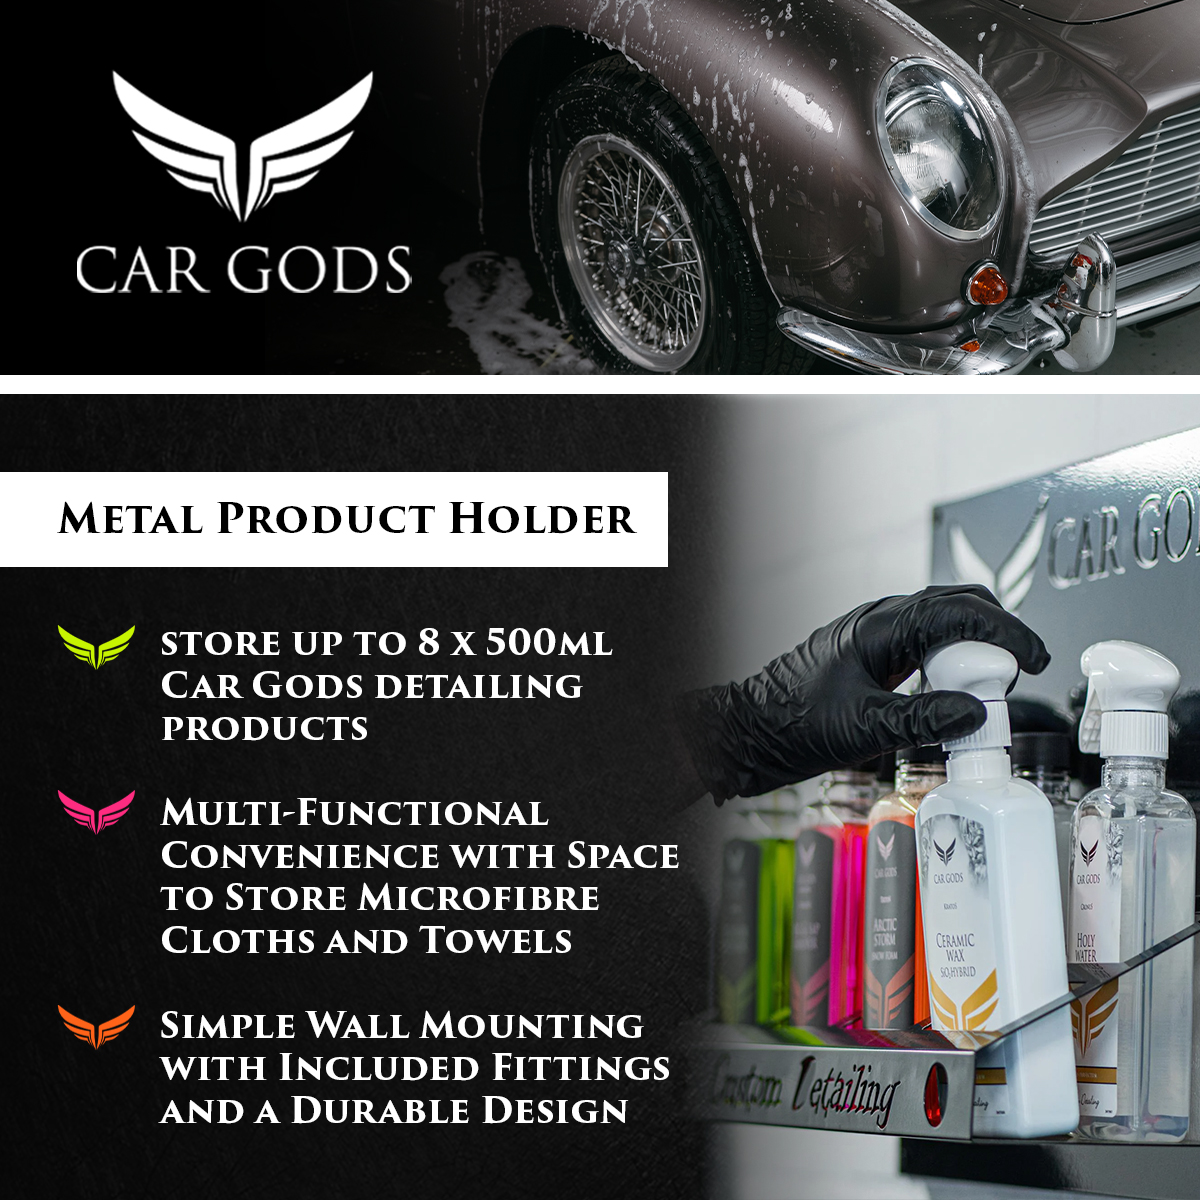 Car Gods Metal Product Holder. Store up to 8 500ml Car Gods detailing products for efficiency at your fingertips. Durable and multi-functional design, the Car Gods Metal Product Holder also has convenient space to store microfibre cloths and towels, plus, the simple wall mounting fittings are included.